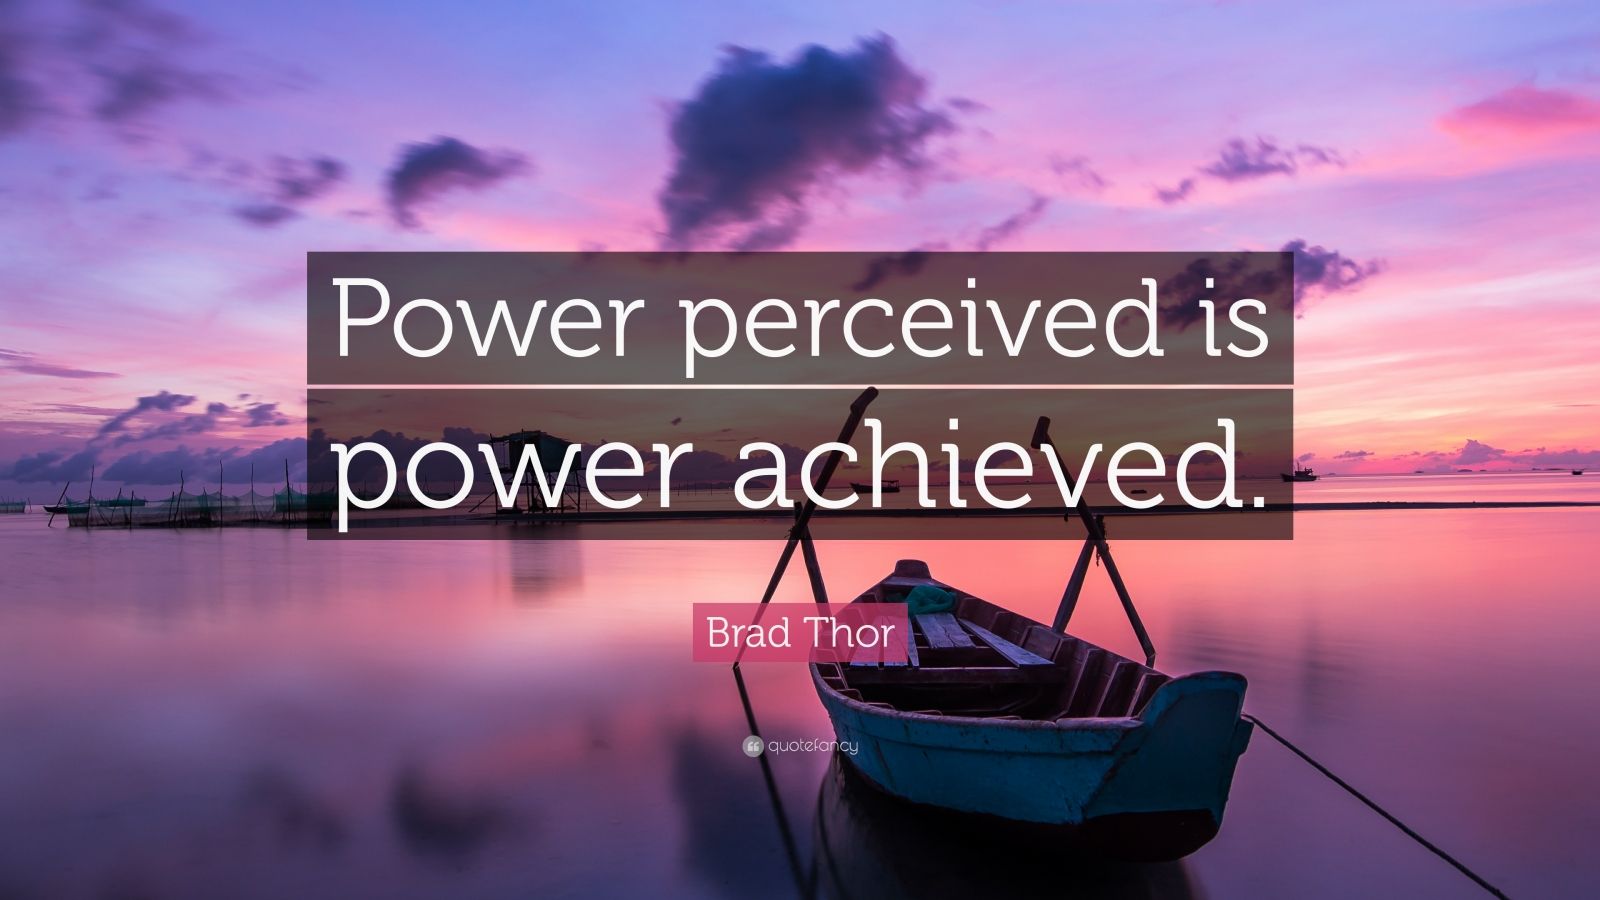 Power perceived is power achieved